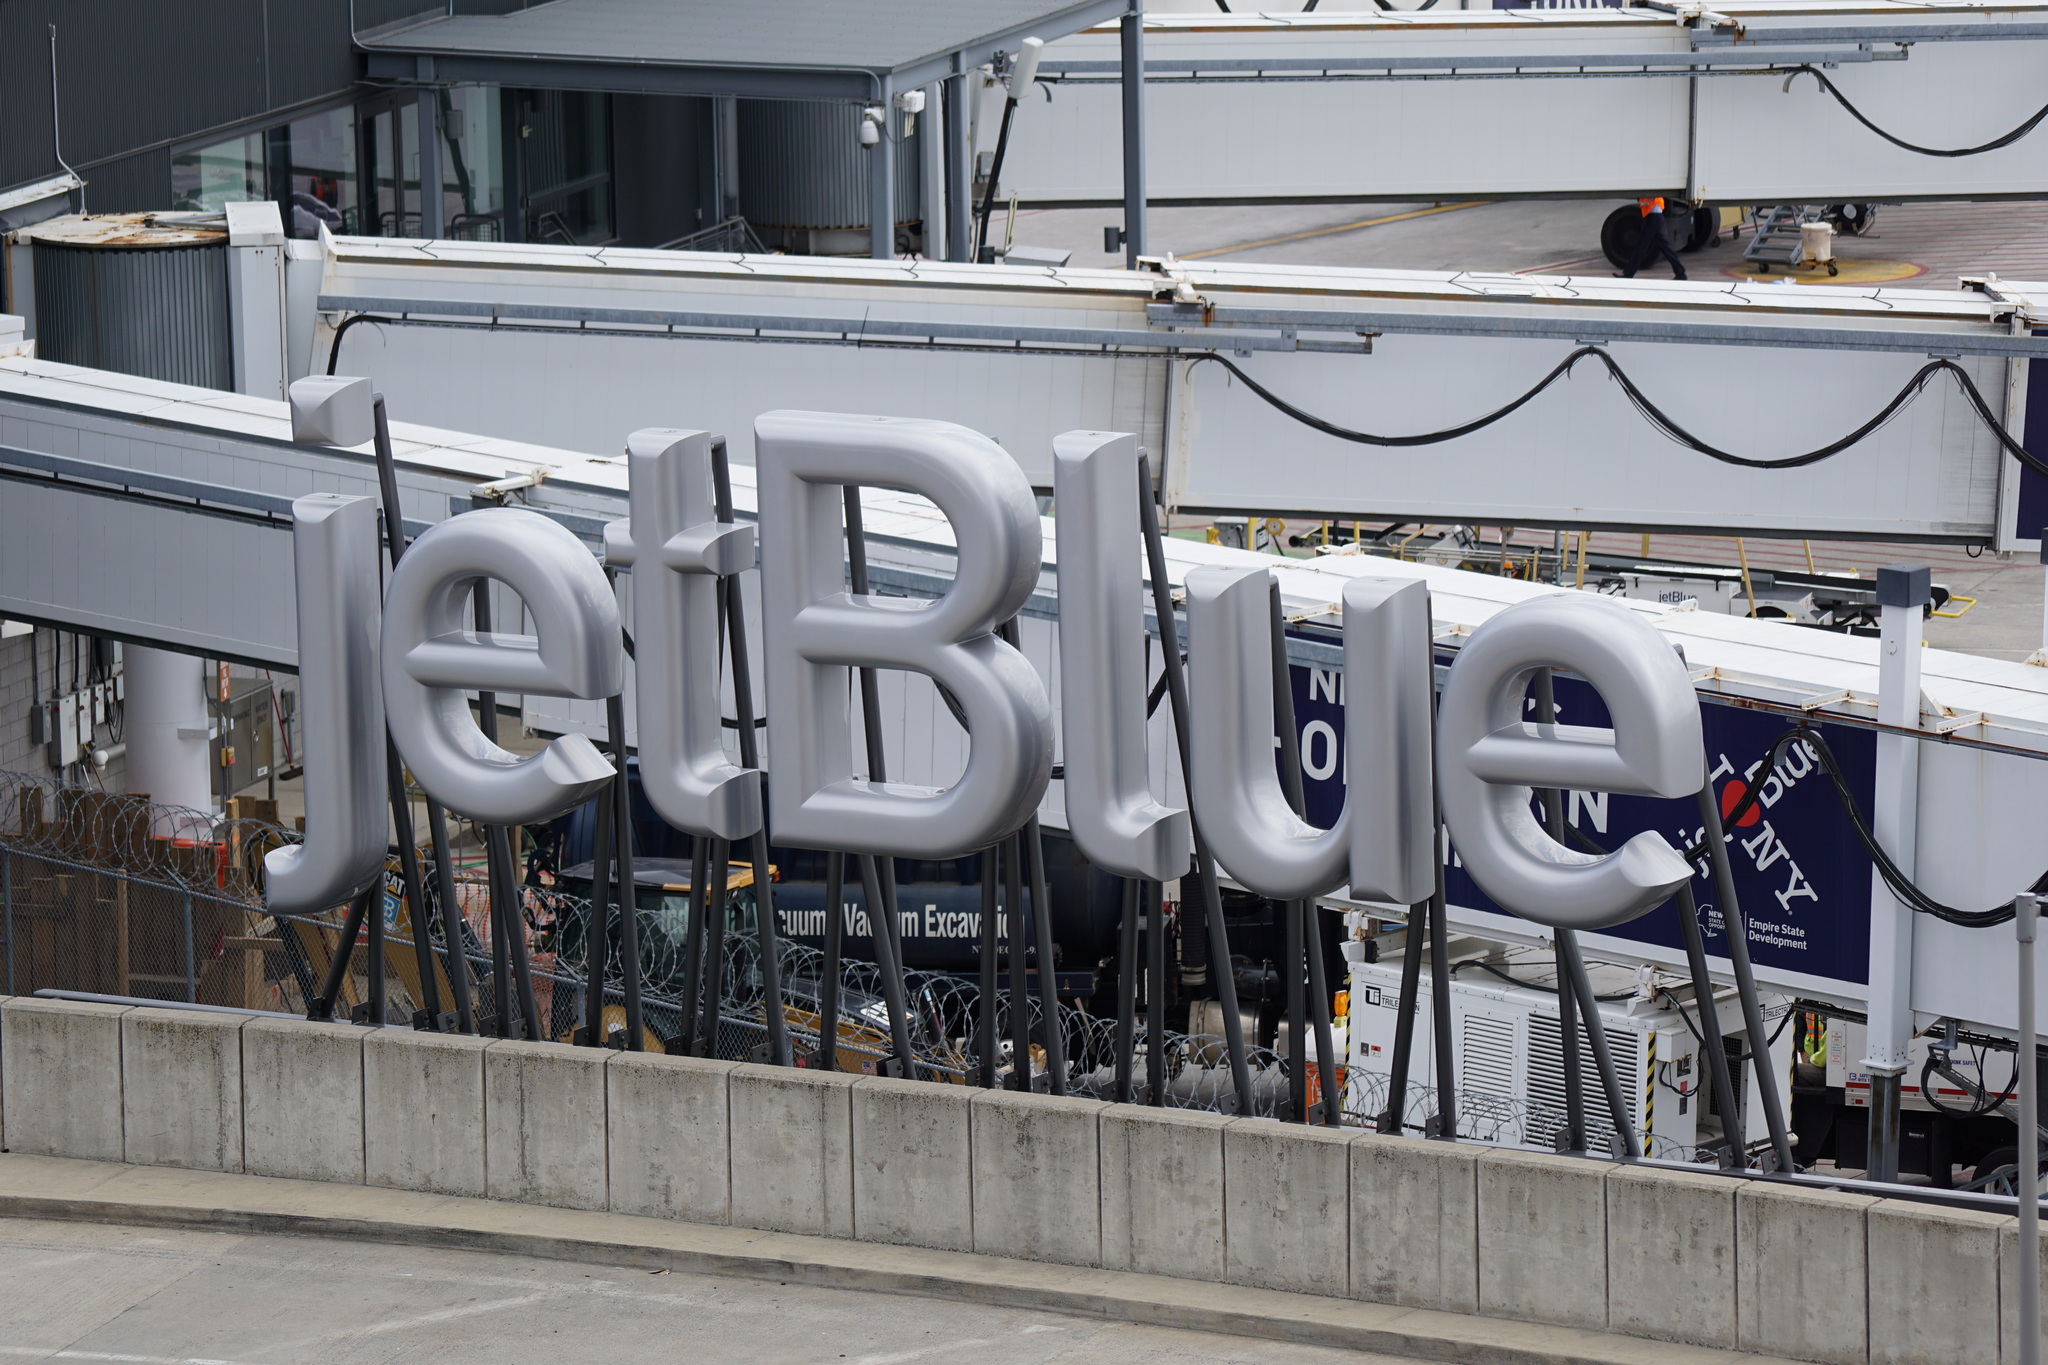 Silver jetBlue sign located at JFK airport.